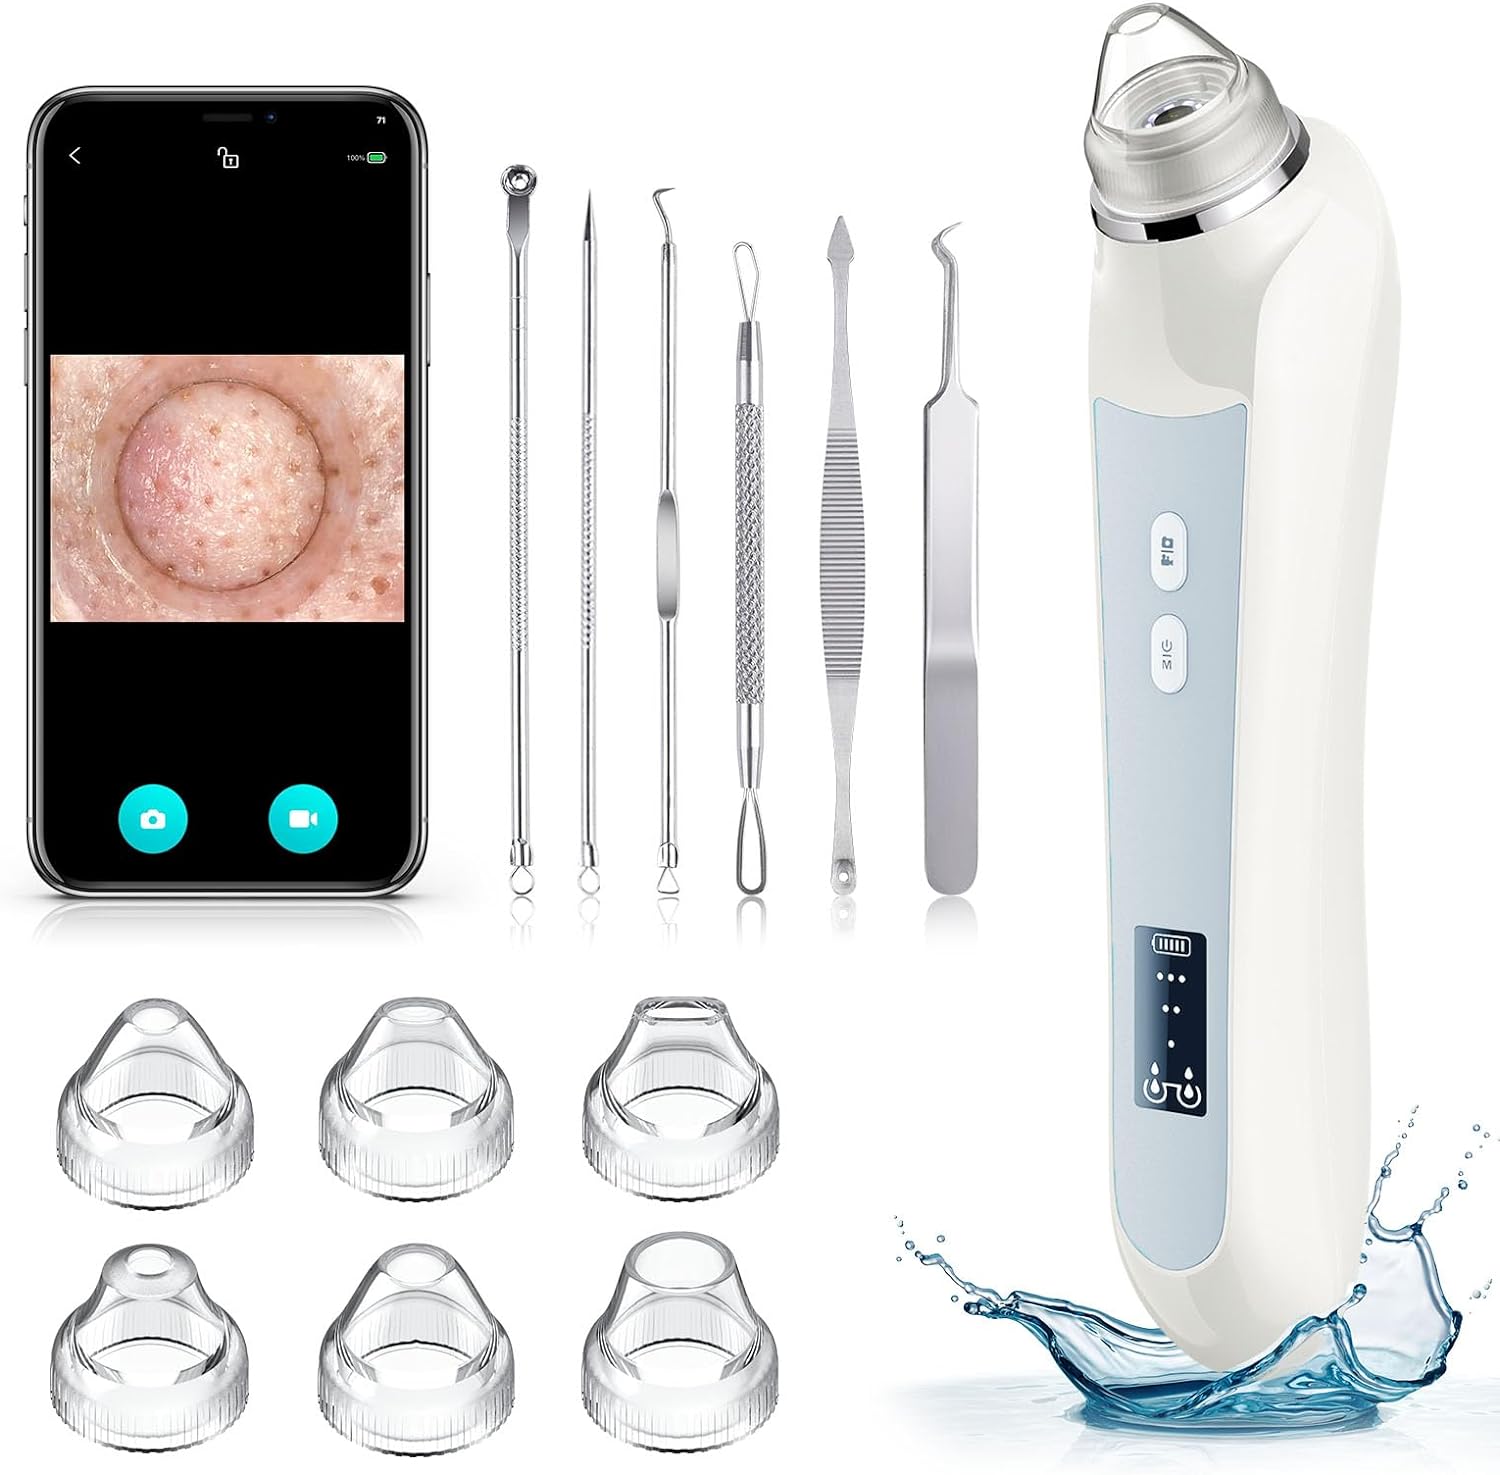 Blackhead Remover Vacuum, Black Head Extractions Tool with Camerafor, USB Interface Type Pore Vacuum, Men and Women Pore Cleaner, 6 Suction Heads  3 Adjustment Modes （Light Blue）